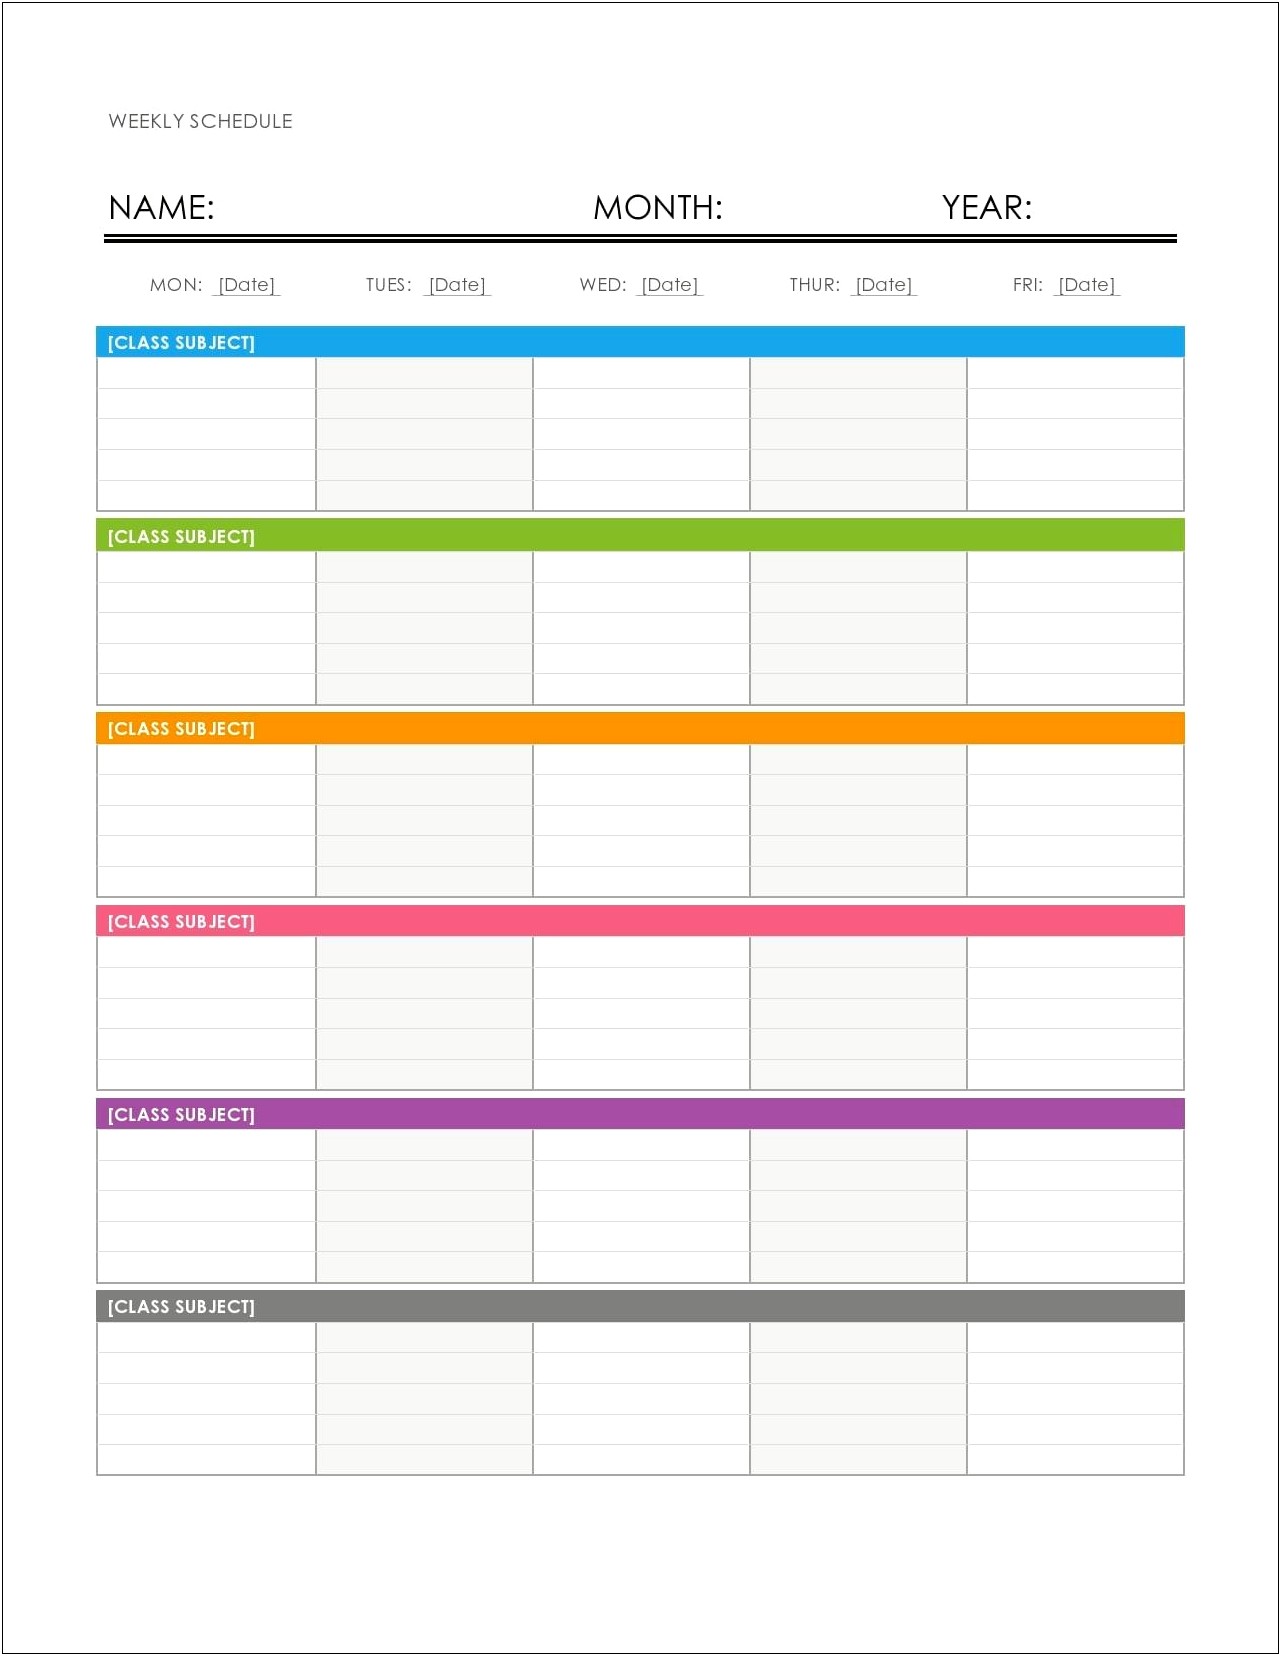 Copy A Calender Template Into Word